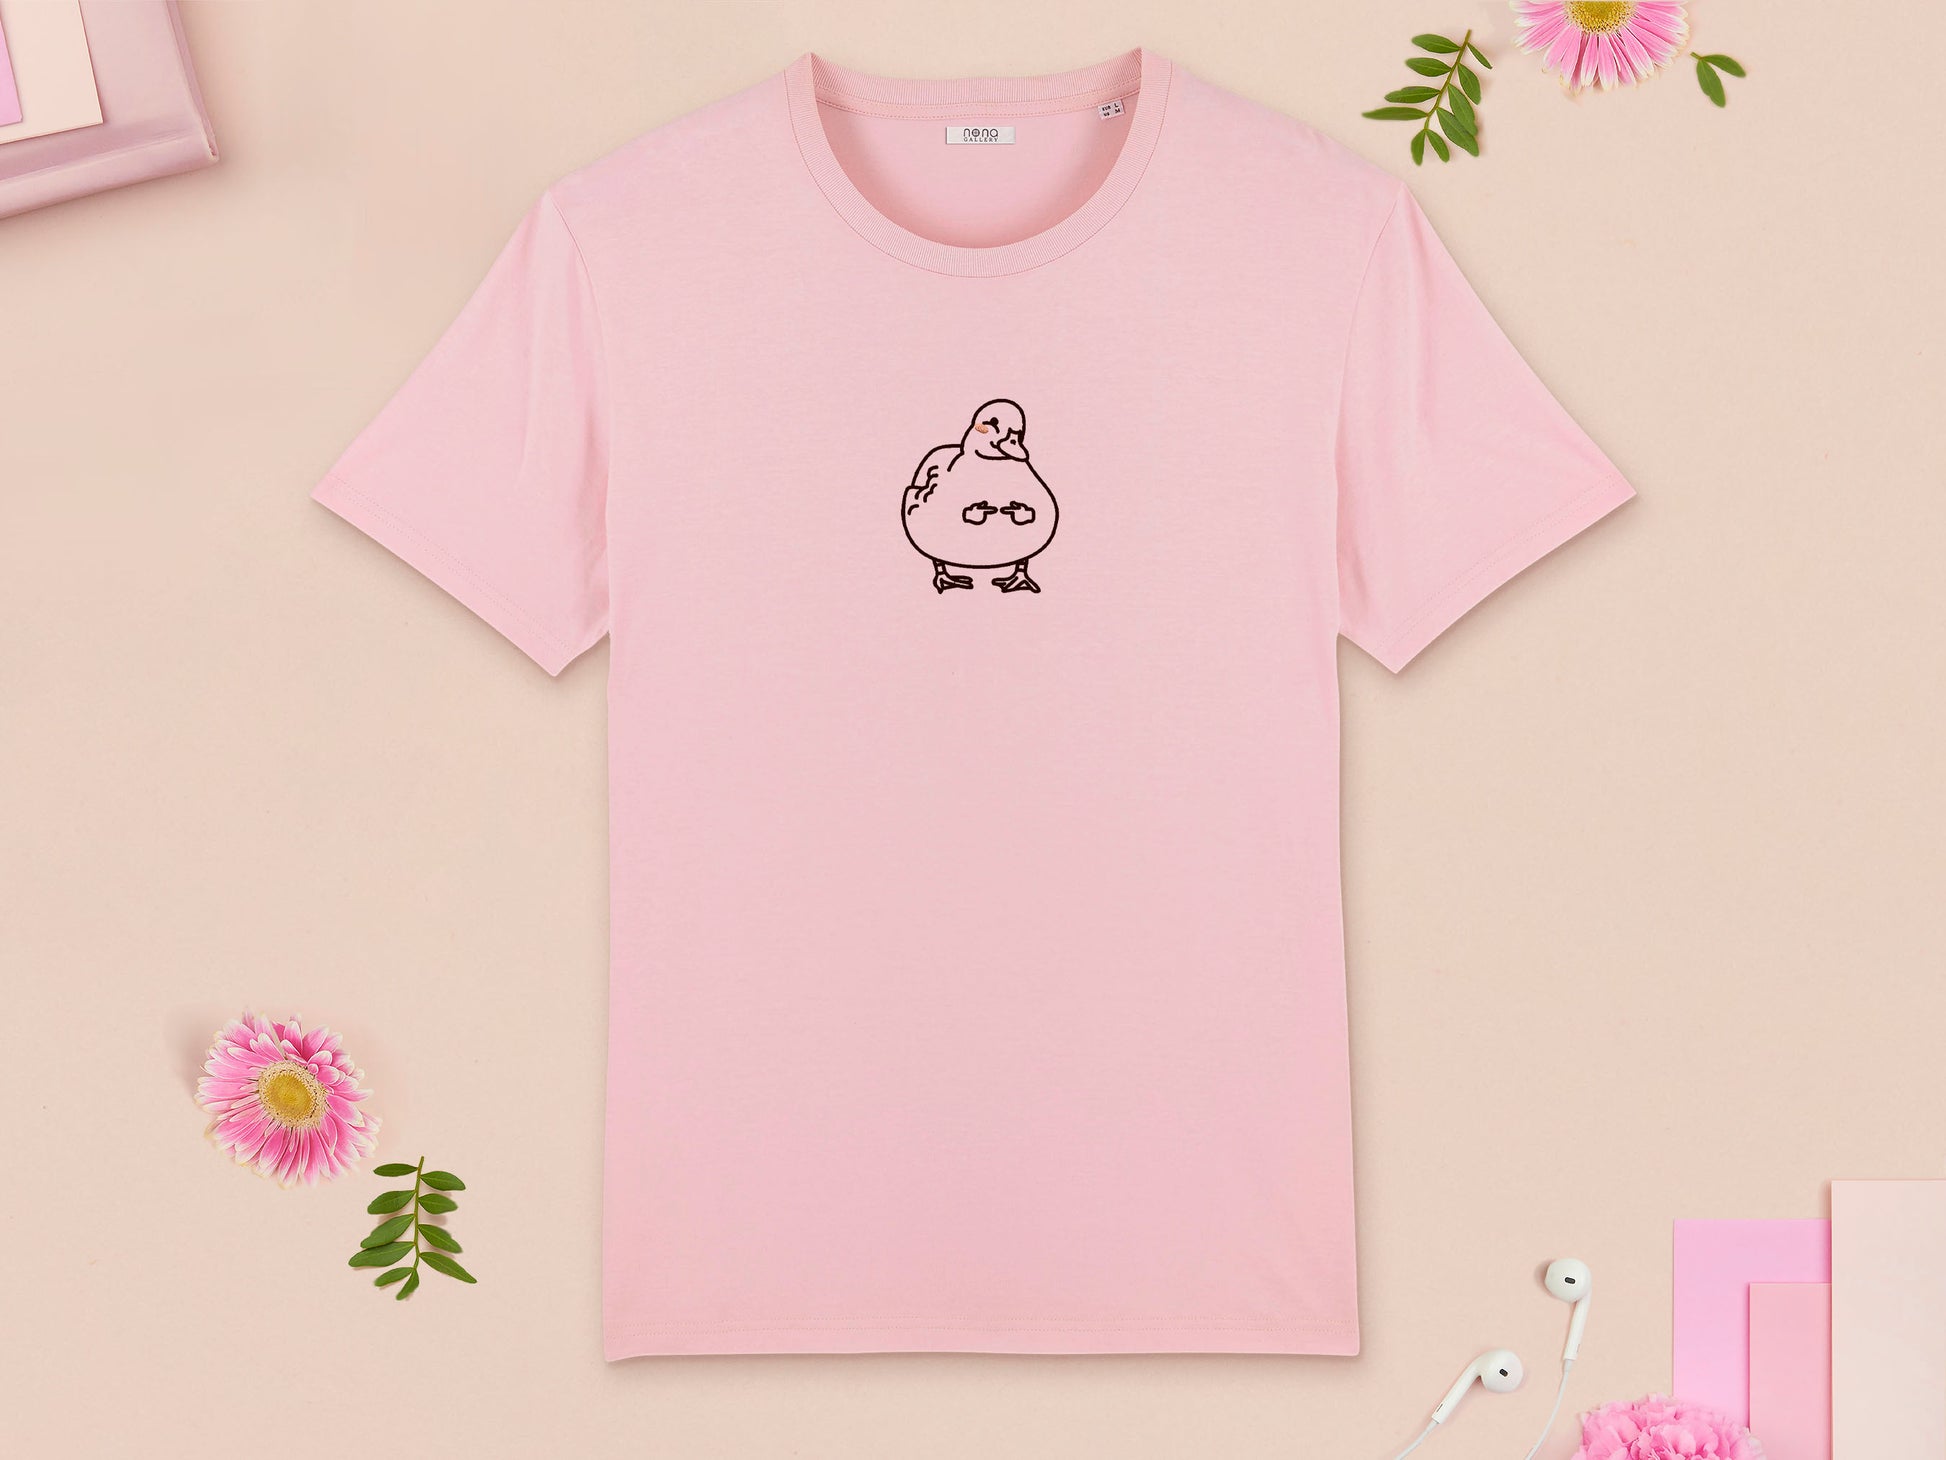 A pink crew neck short sleeve t-shirt, with an embroidered brown thread design of cute blushing duck with the for me finger hand emoji symbols